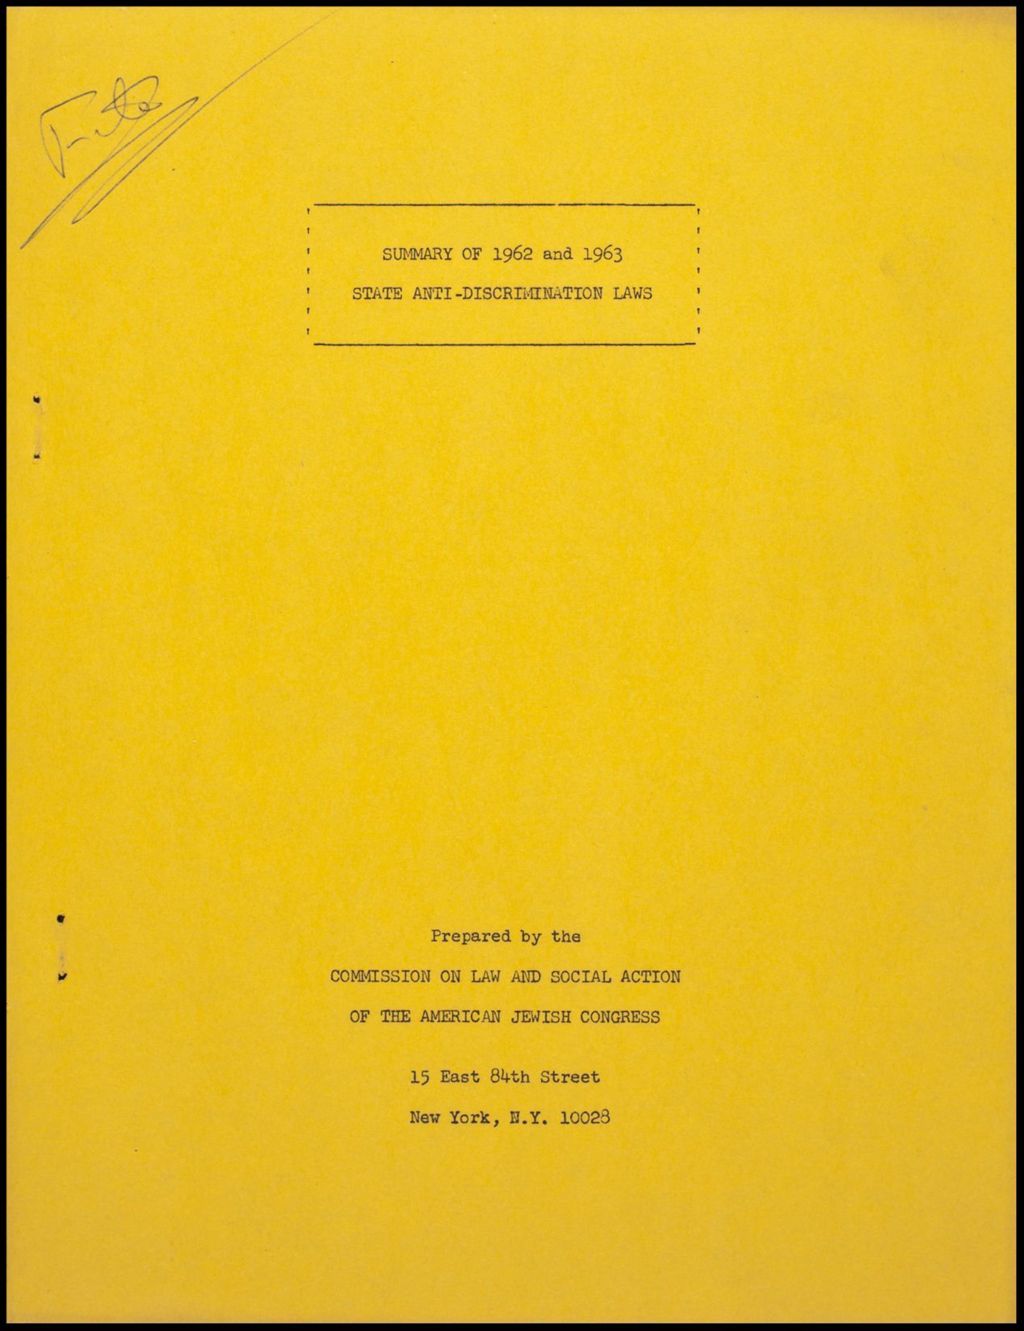 Miniature of Research and Publications on Race Relations, 1960 (III-1811)